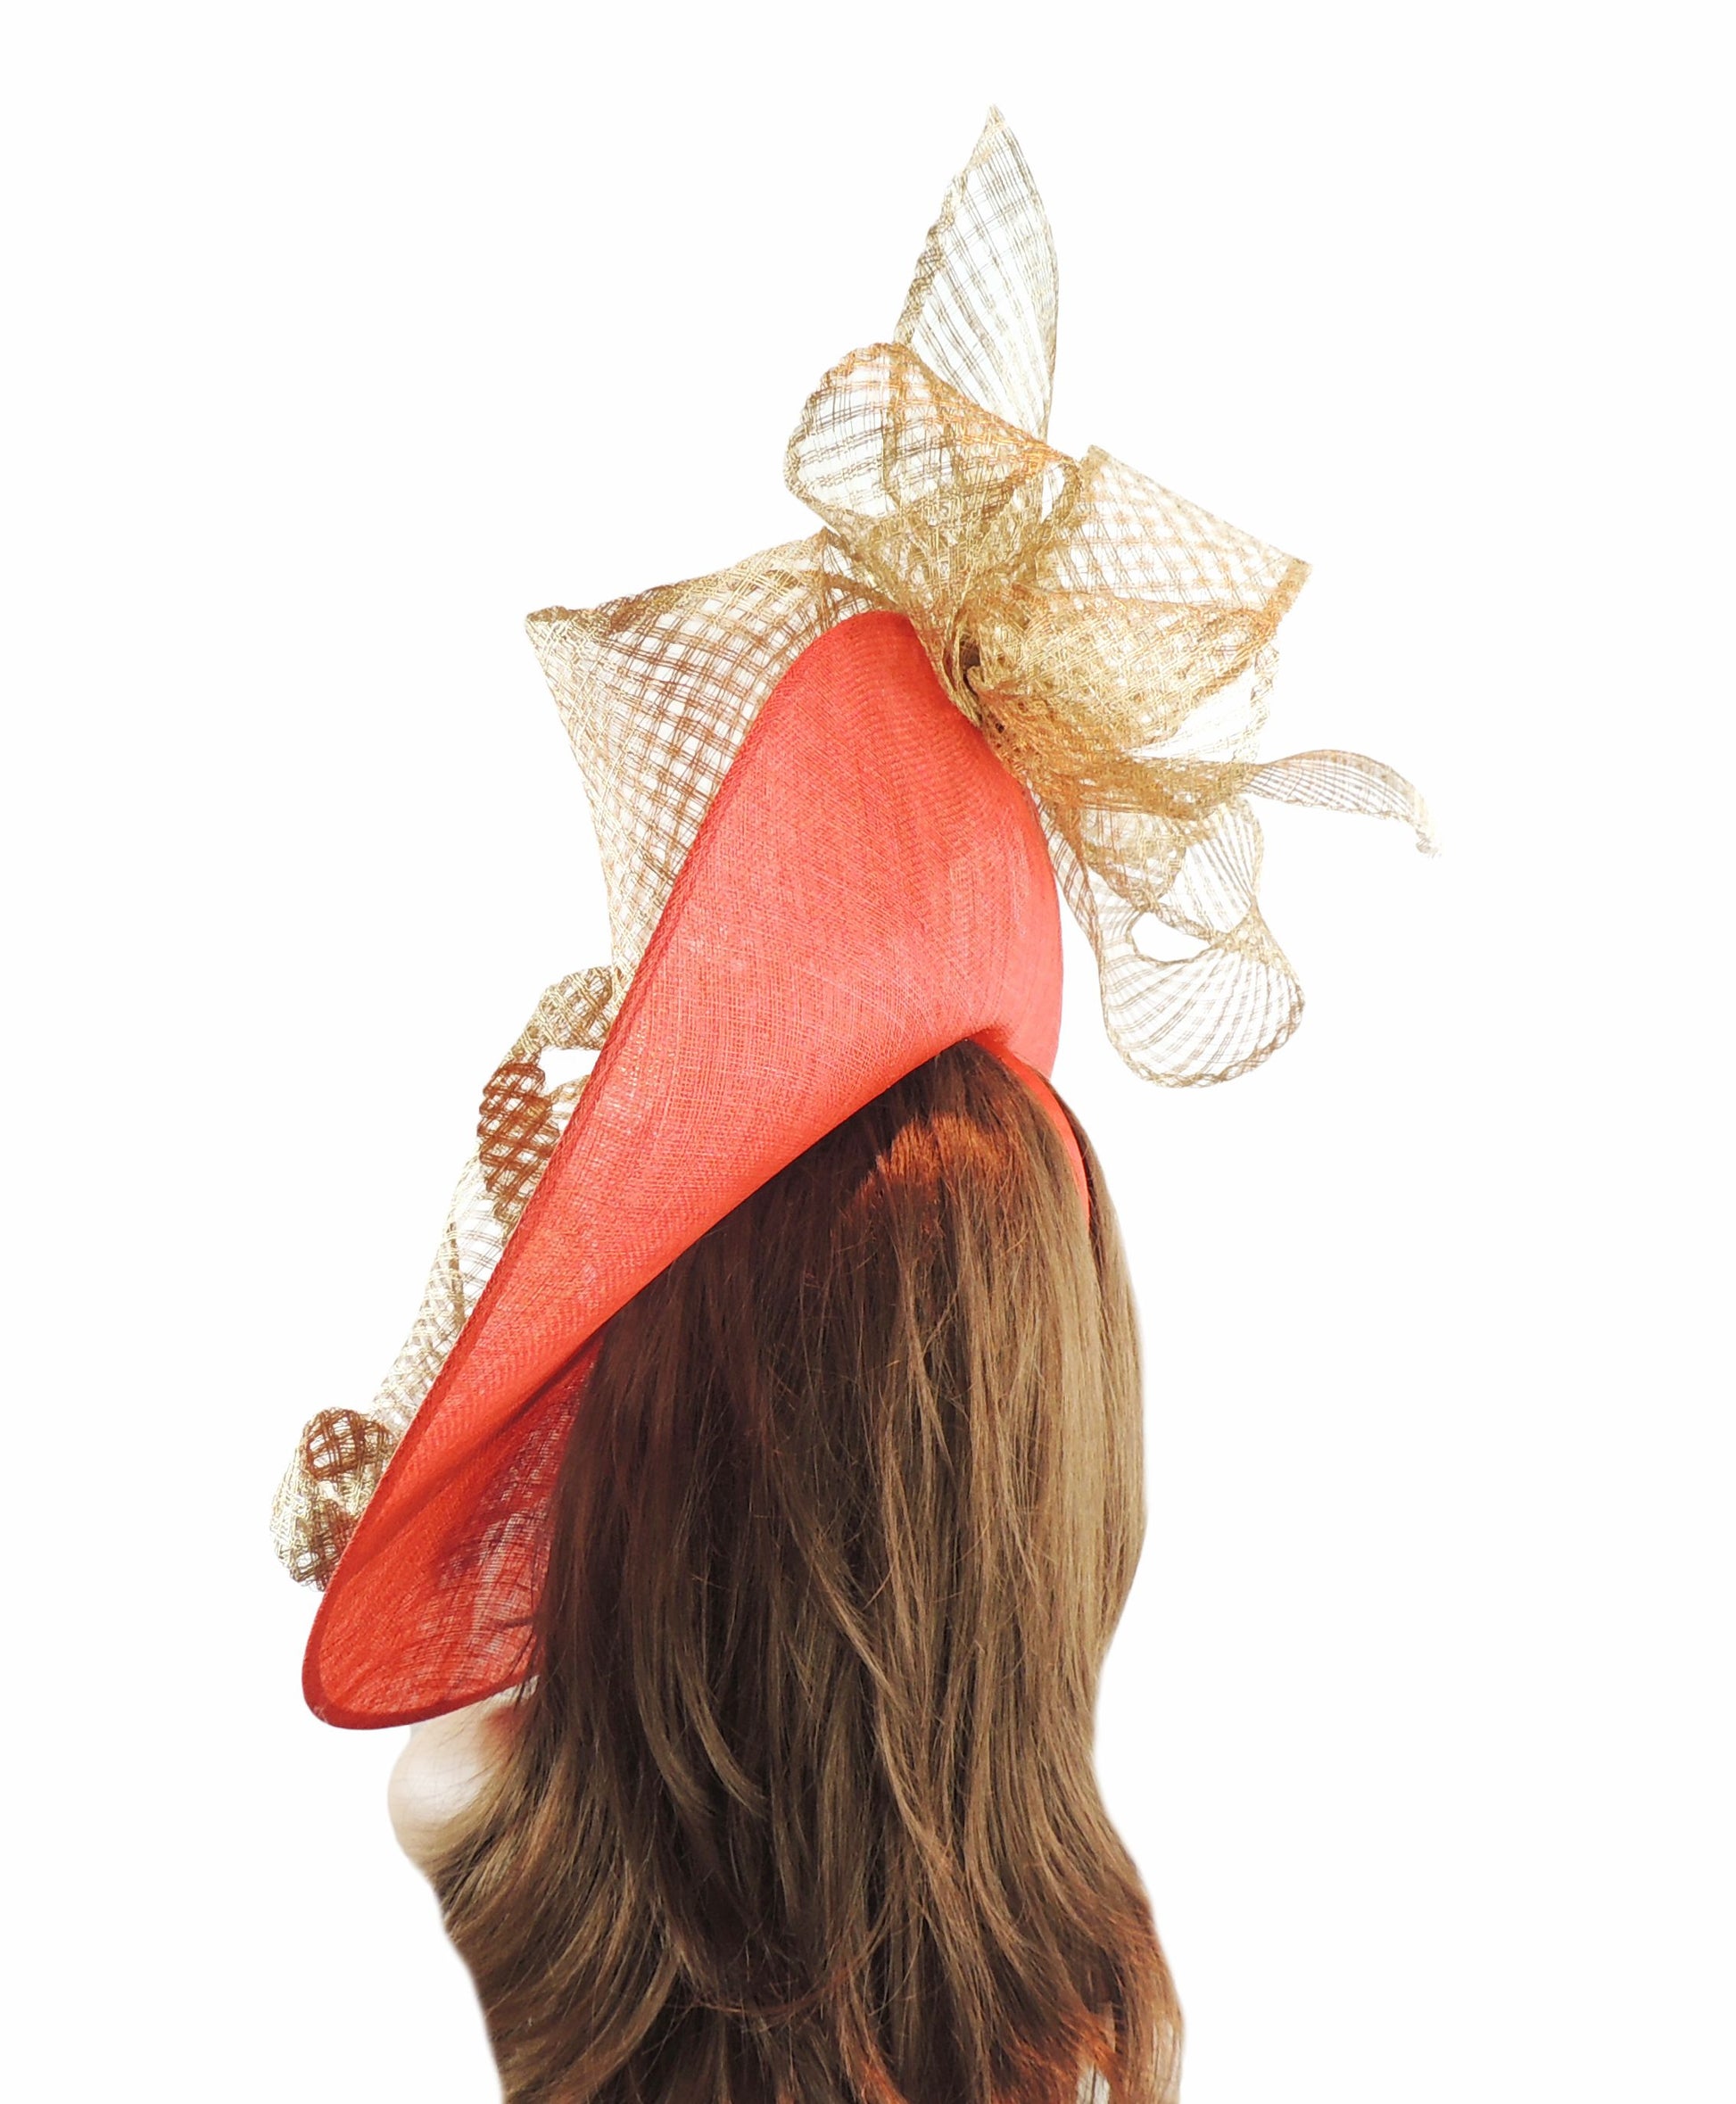 Thea Large Kentucky Derby Saucer Hatinator - Hats By Cressida